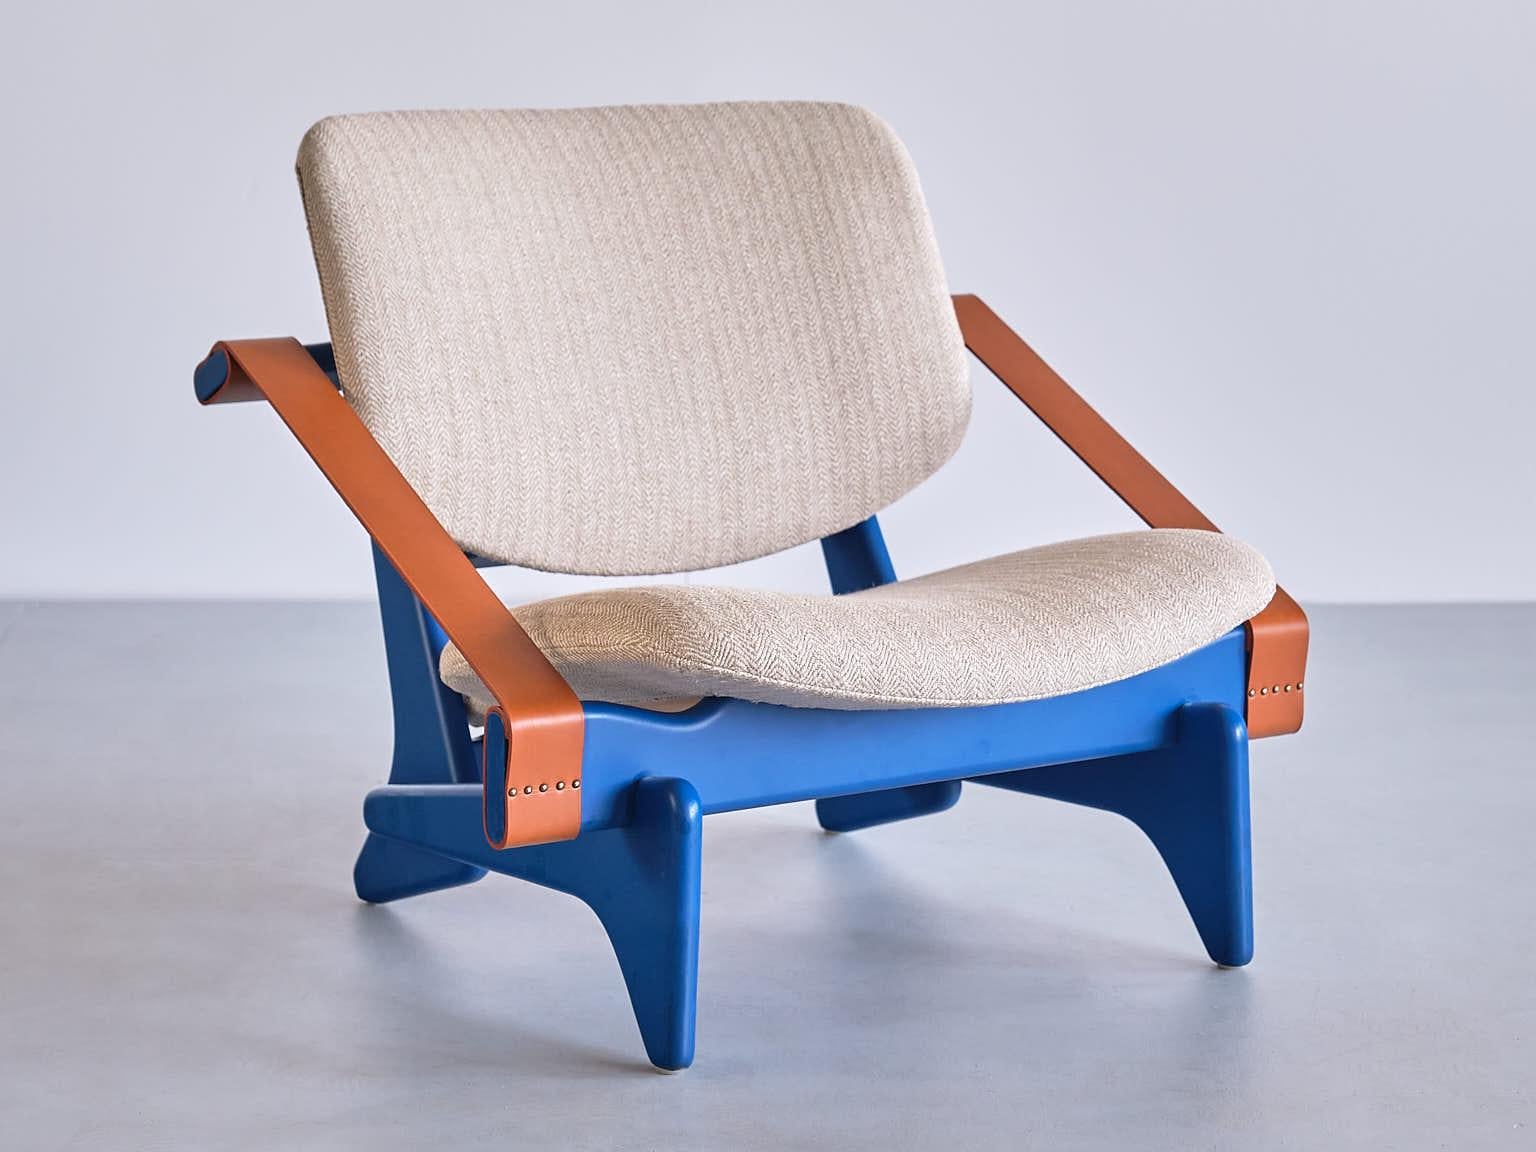 This rare armchair was designed by Olof Ottelin in 1958. The model was named 'Jumbo' and was produced under model number 174 by Keravan Stockmann in Finland. The Jumbo was not only Ottelin's most original and iconic design, it was also the